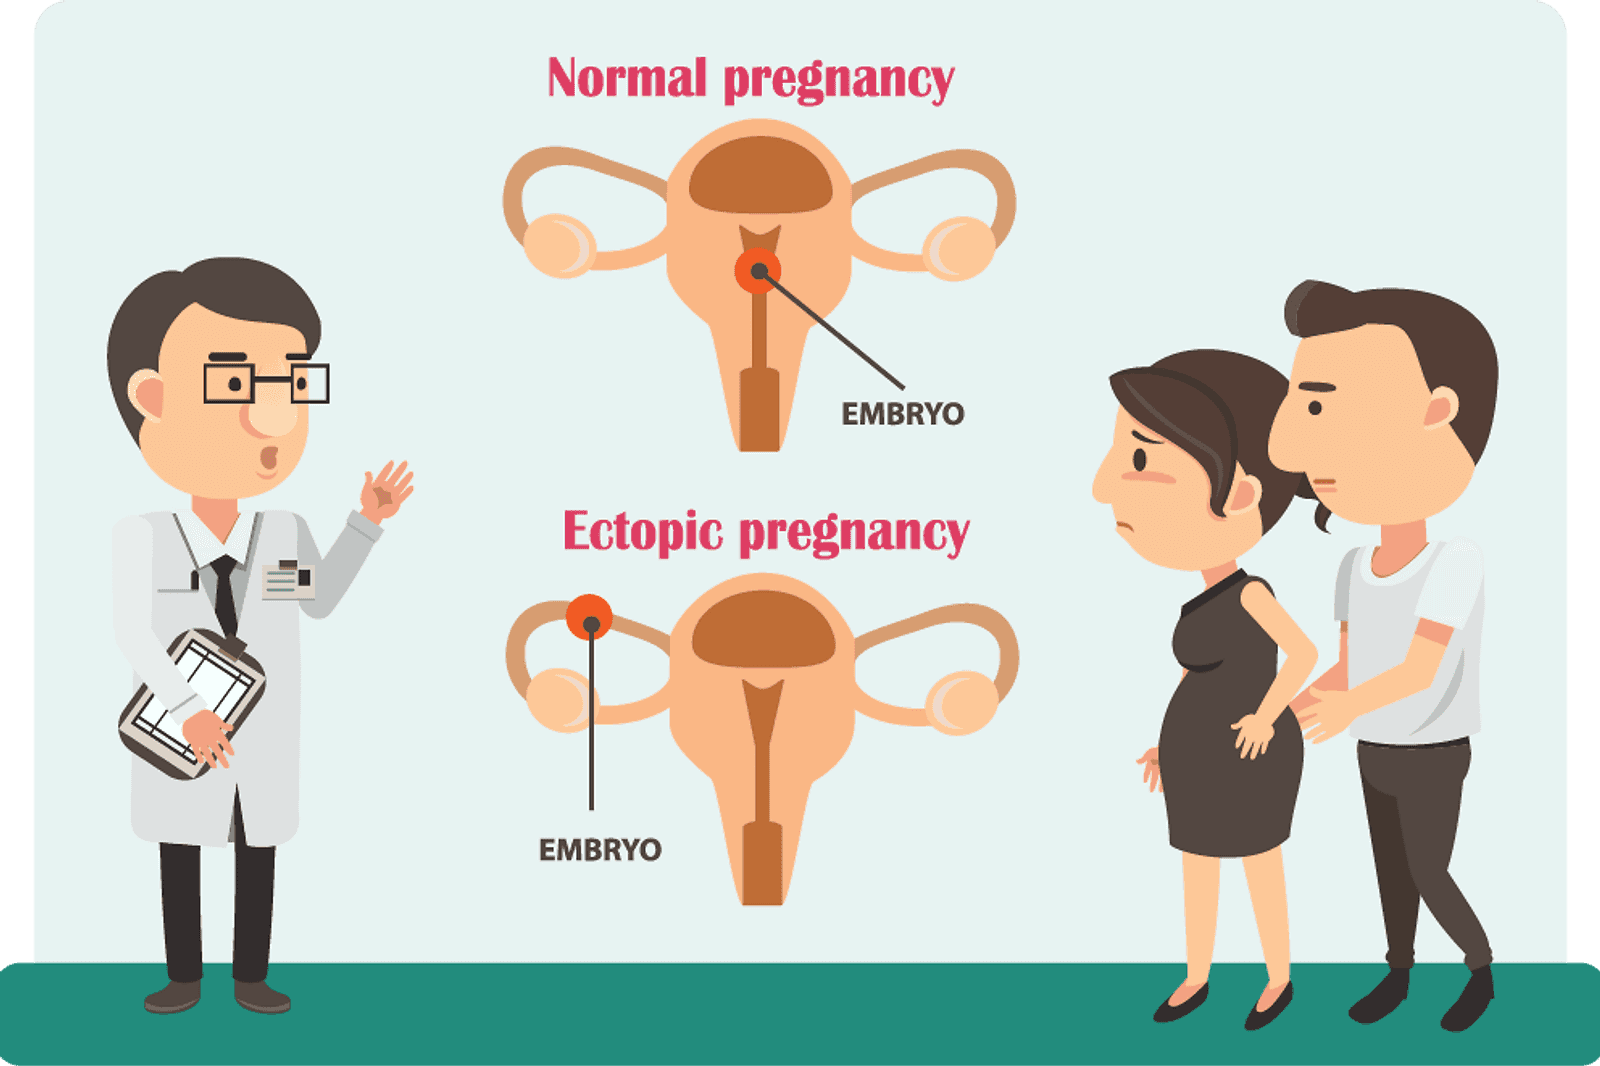 Ectopic Pregnancy – What are the signs?